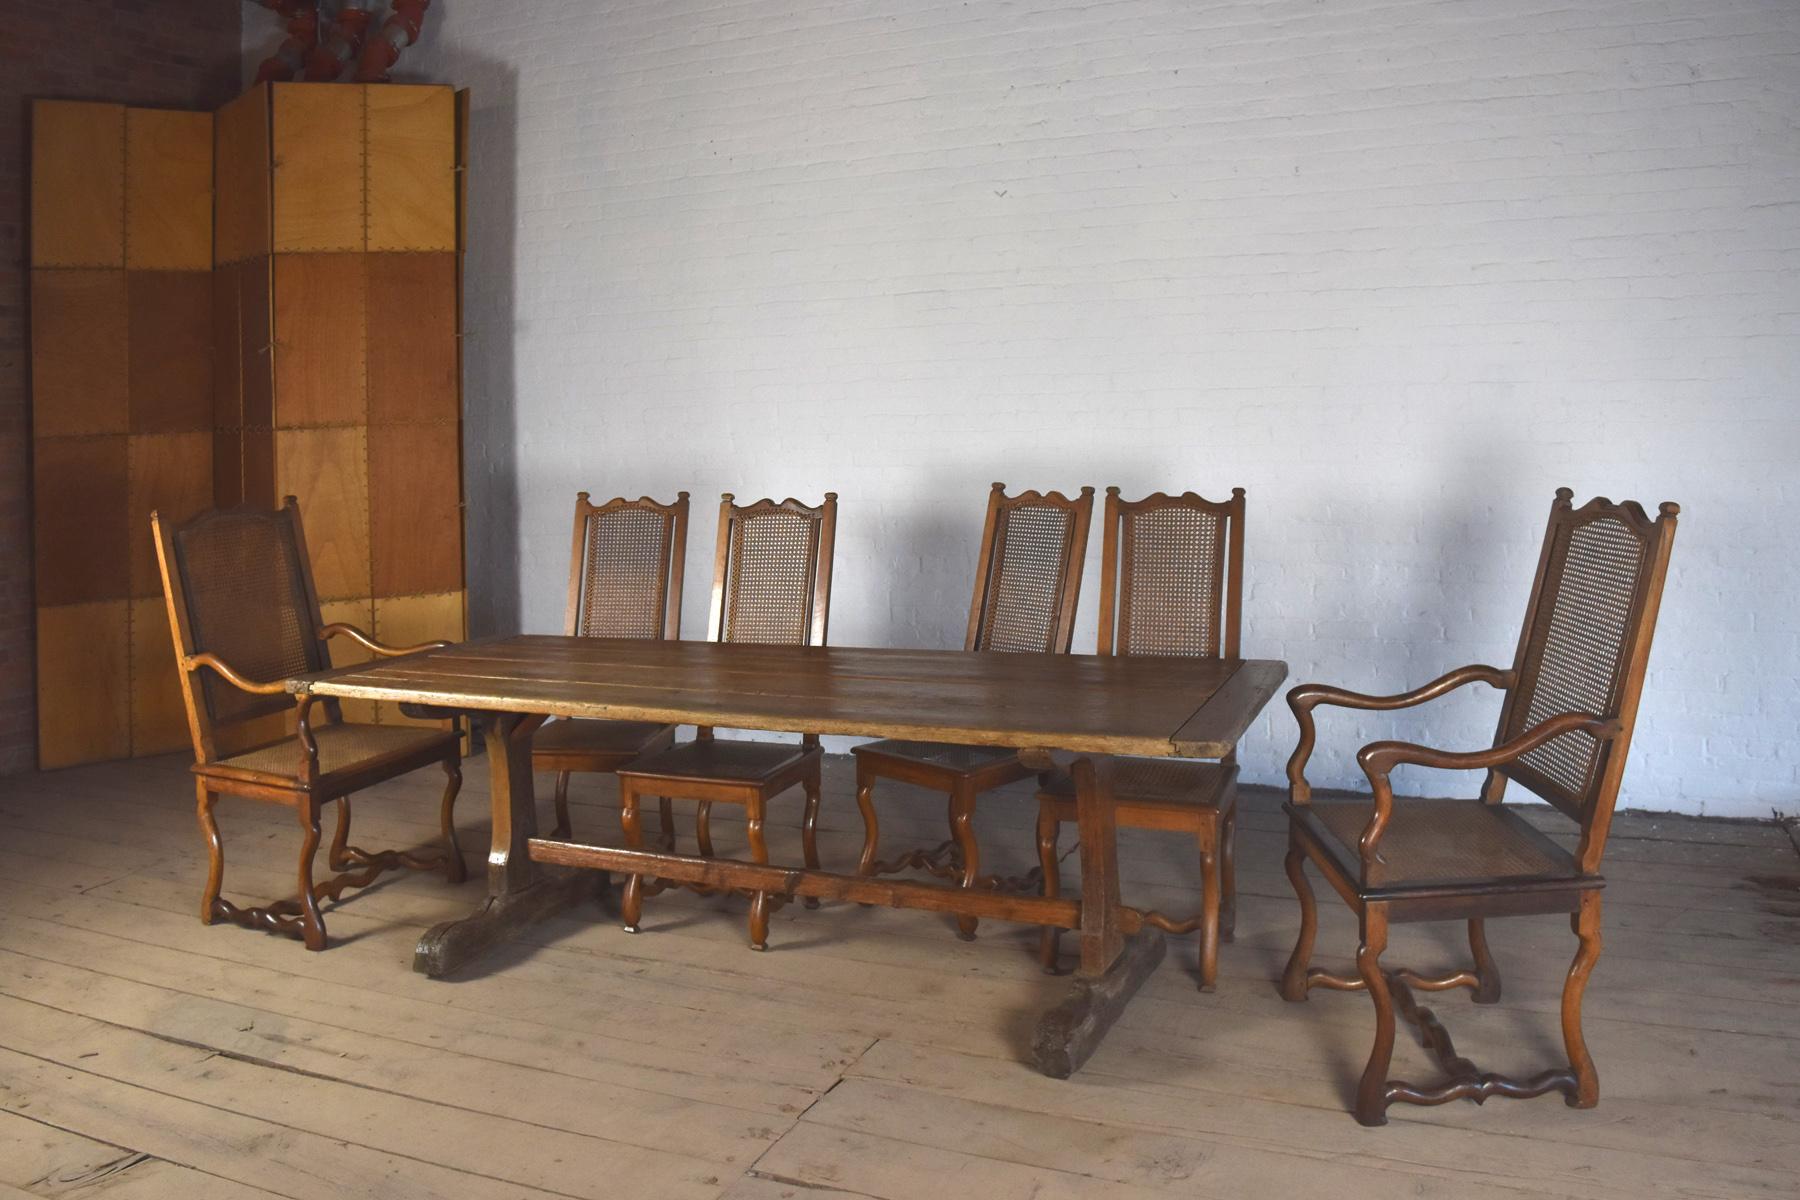 18th Century early American Rustic Pine Trestle Table 2